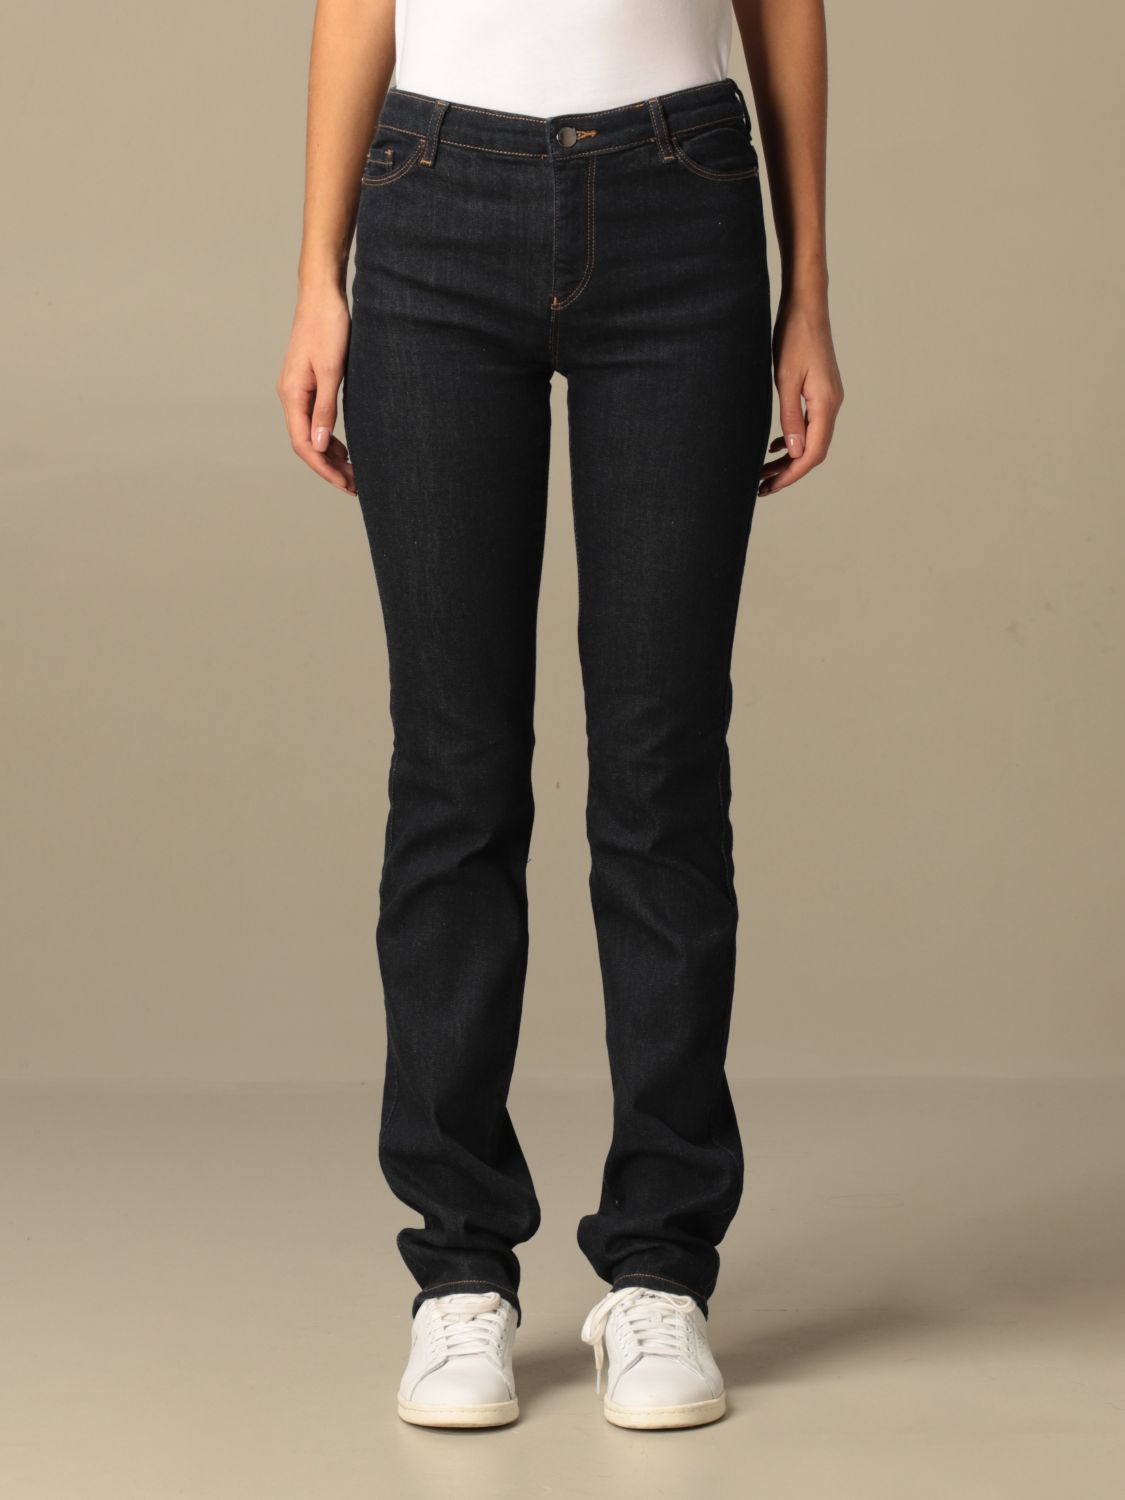 Emporio Armani Outlet: jeans in regular fit denim | Jeans Emporio